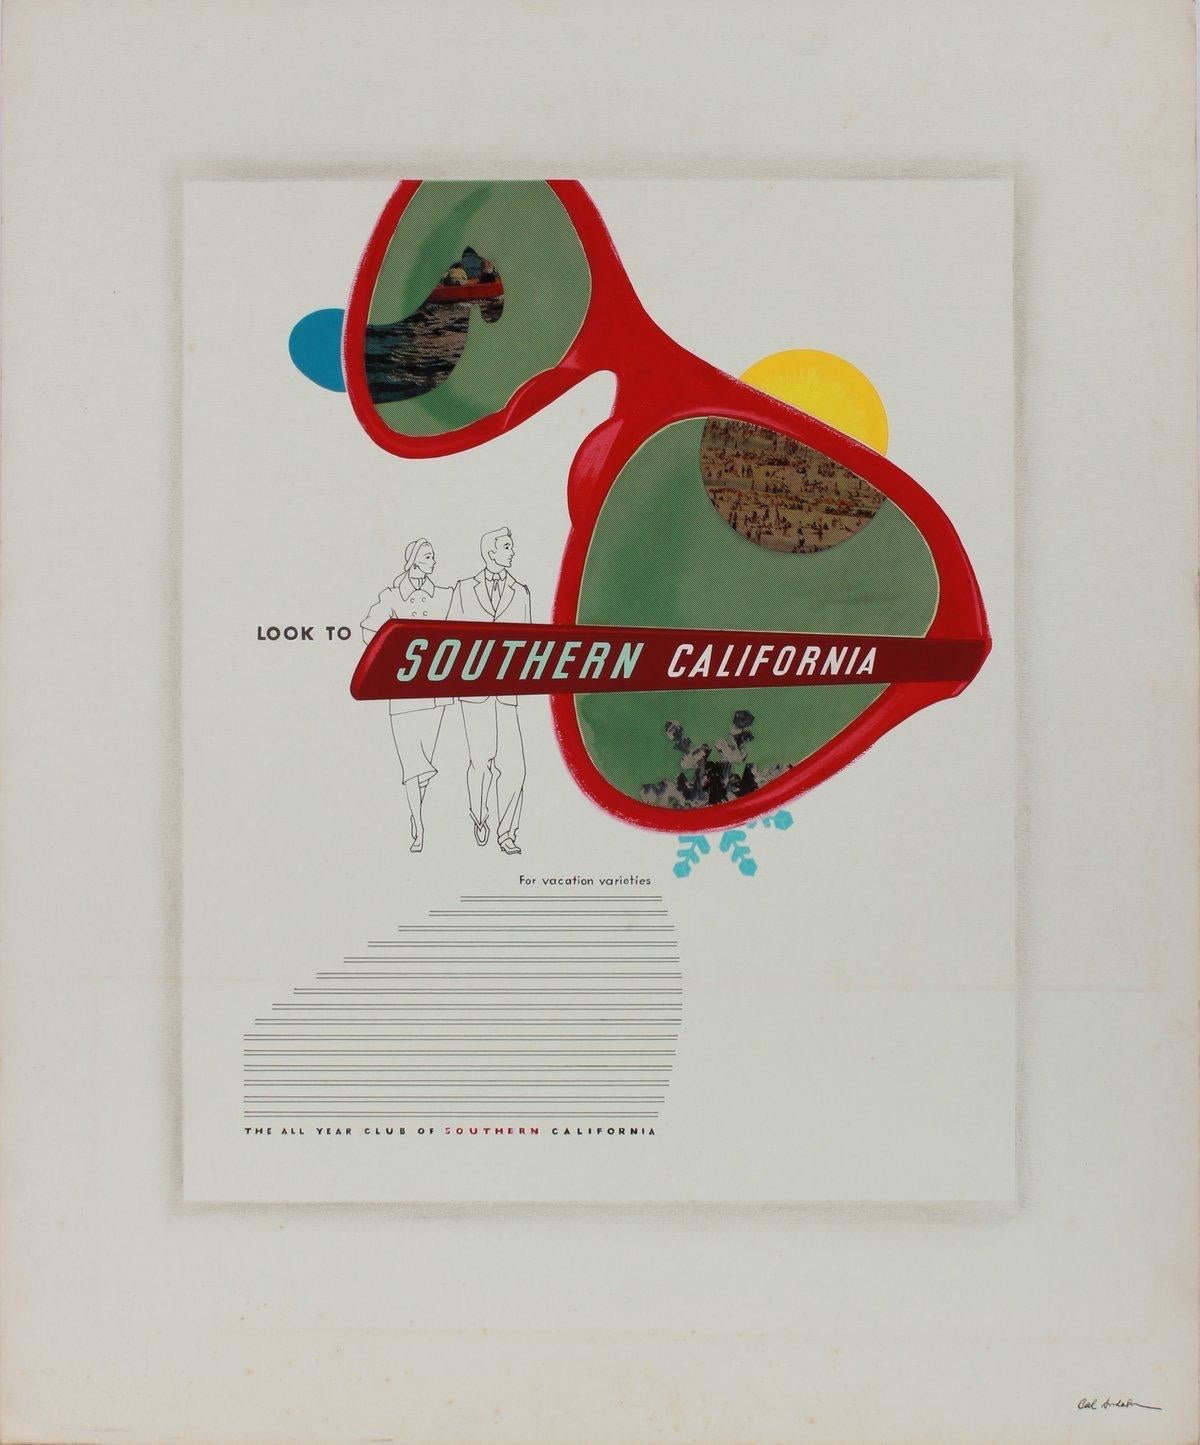 "Look to Southern California" 1950-60s Mixed Media and Collage - Mixed Media Art by Calvin Anderson